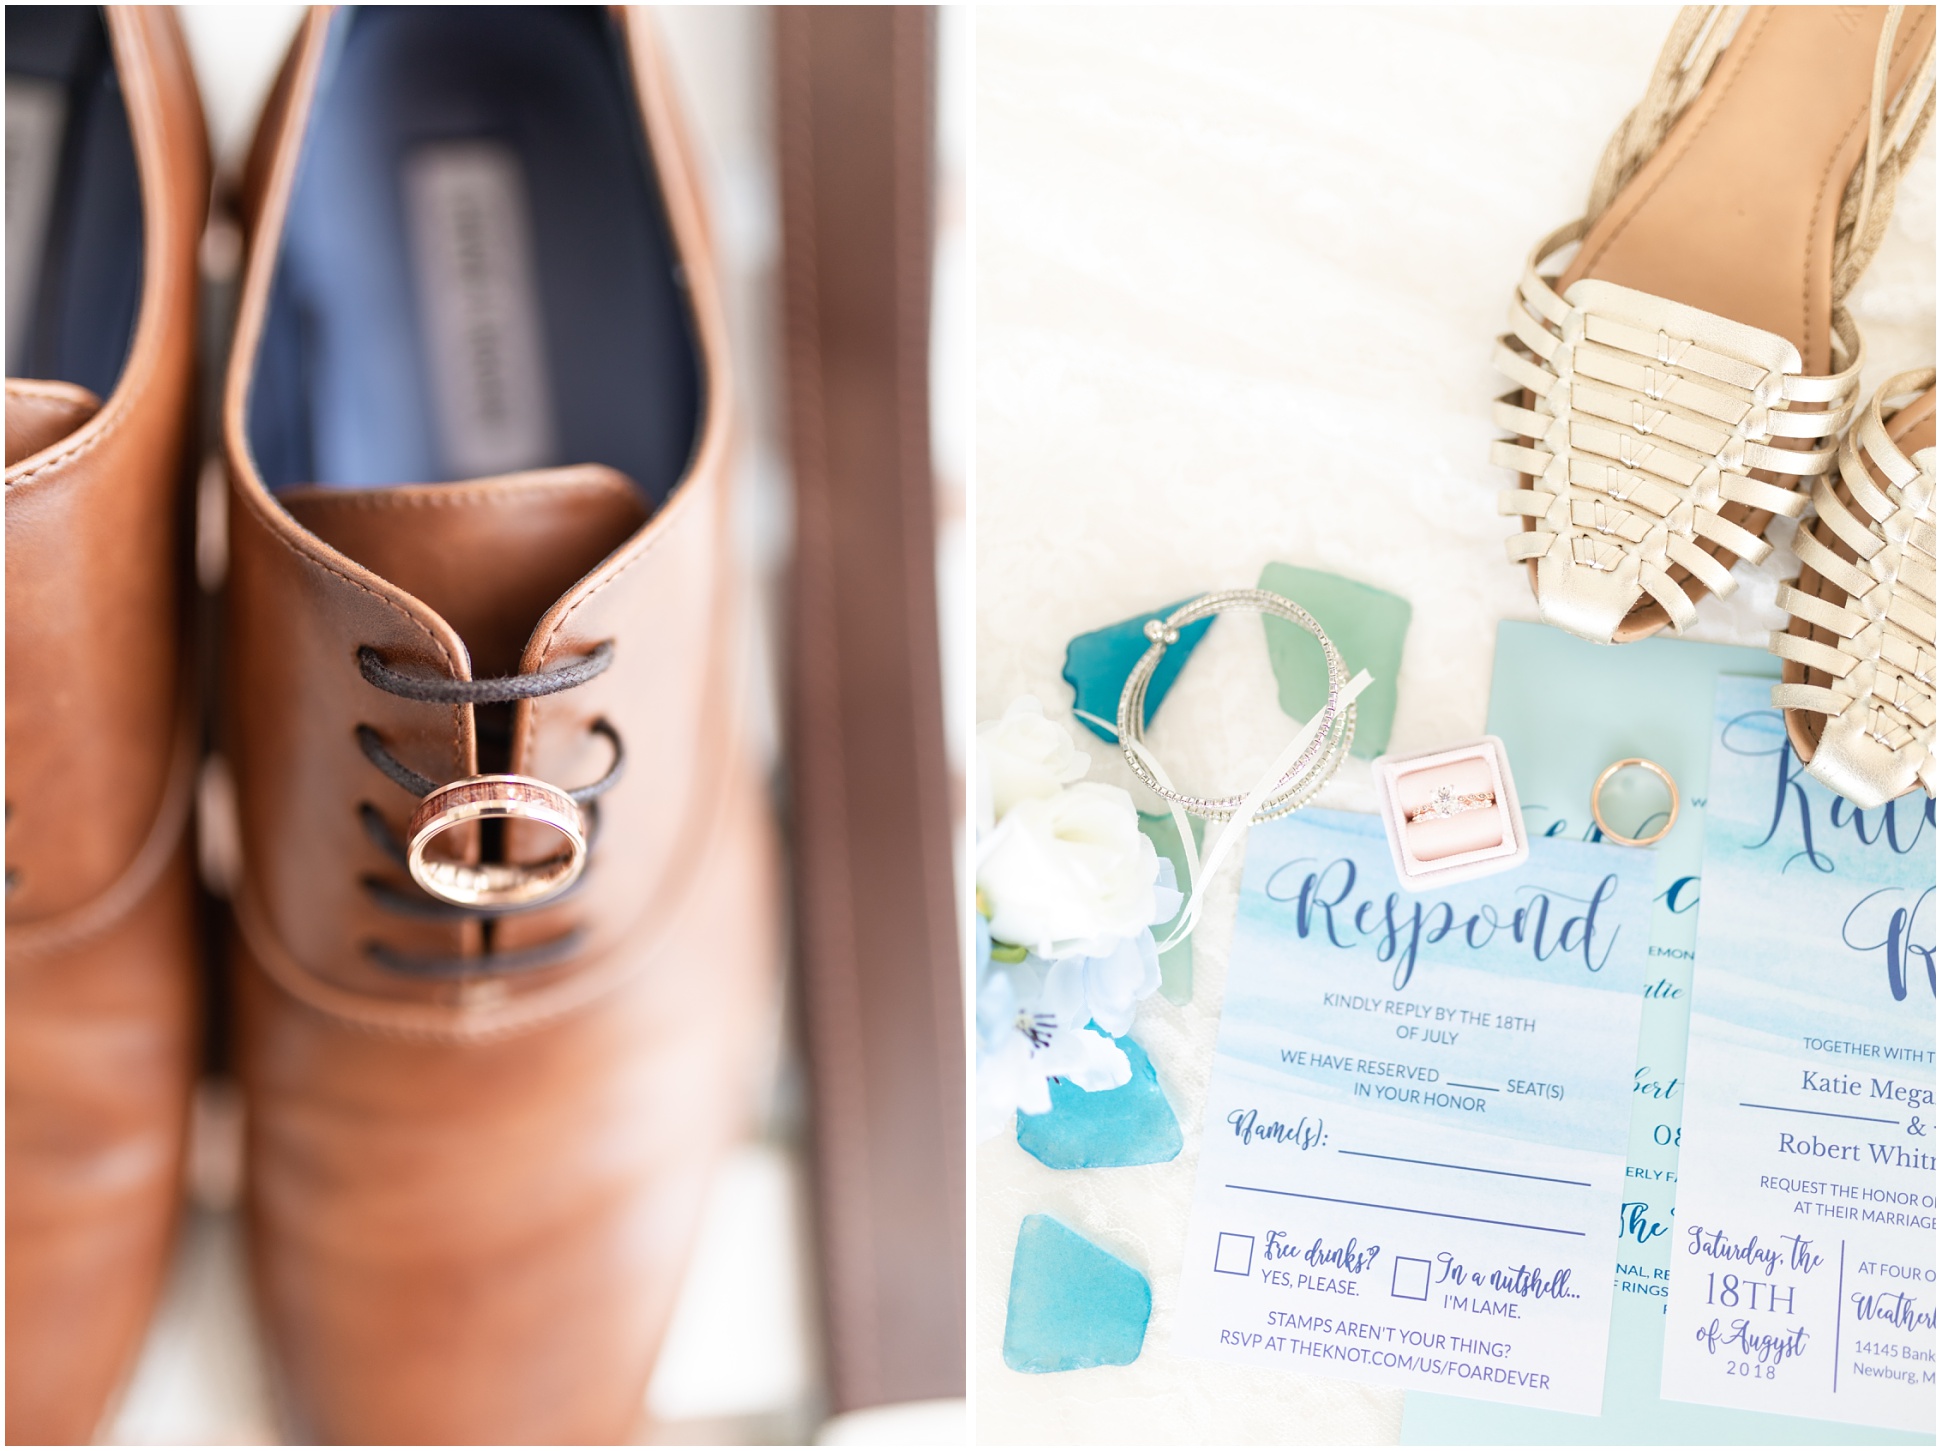 Left Image: Up close of groom's ring on his shoelace; Right Image: Flat lay of invitation suite with ring and ocean stones